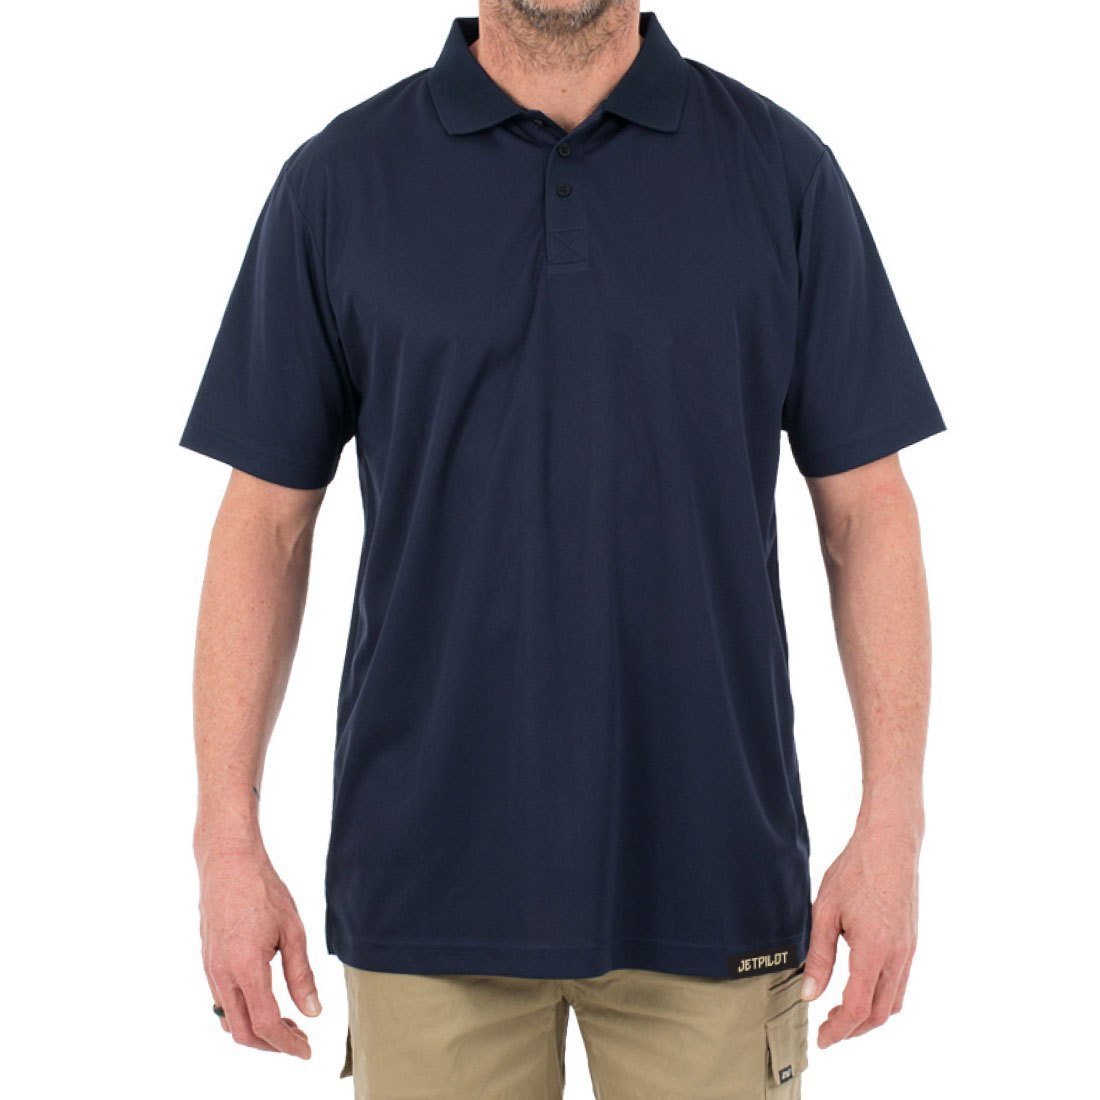 FUELED X2 POLO SHIRT - NAVY